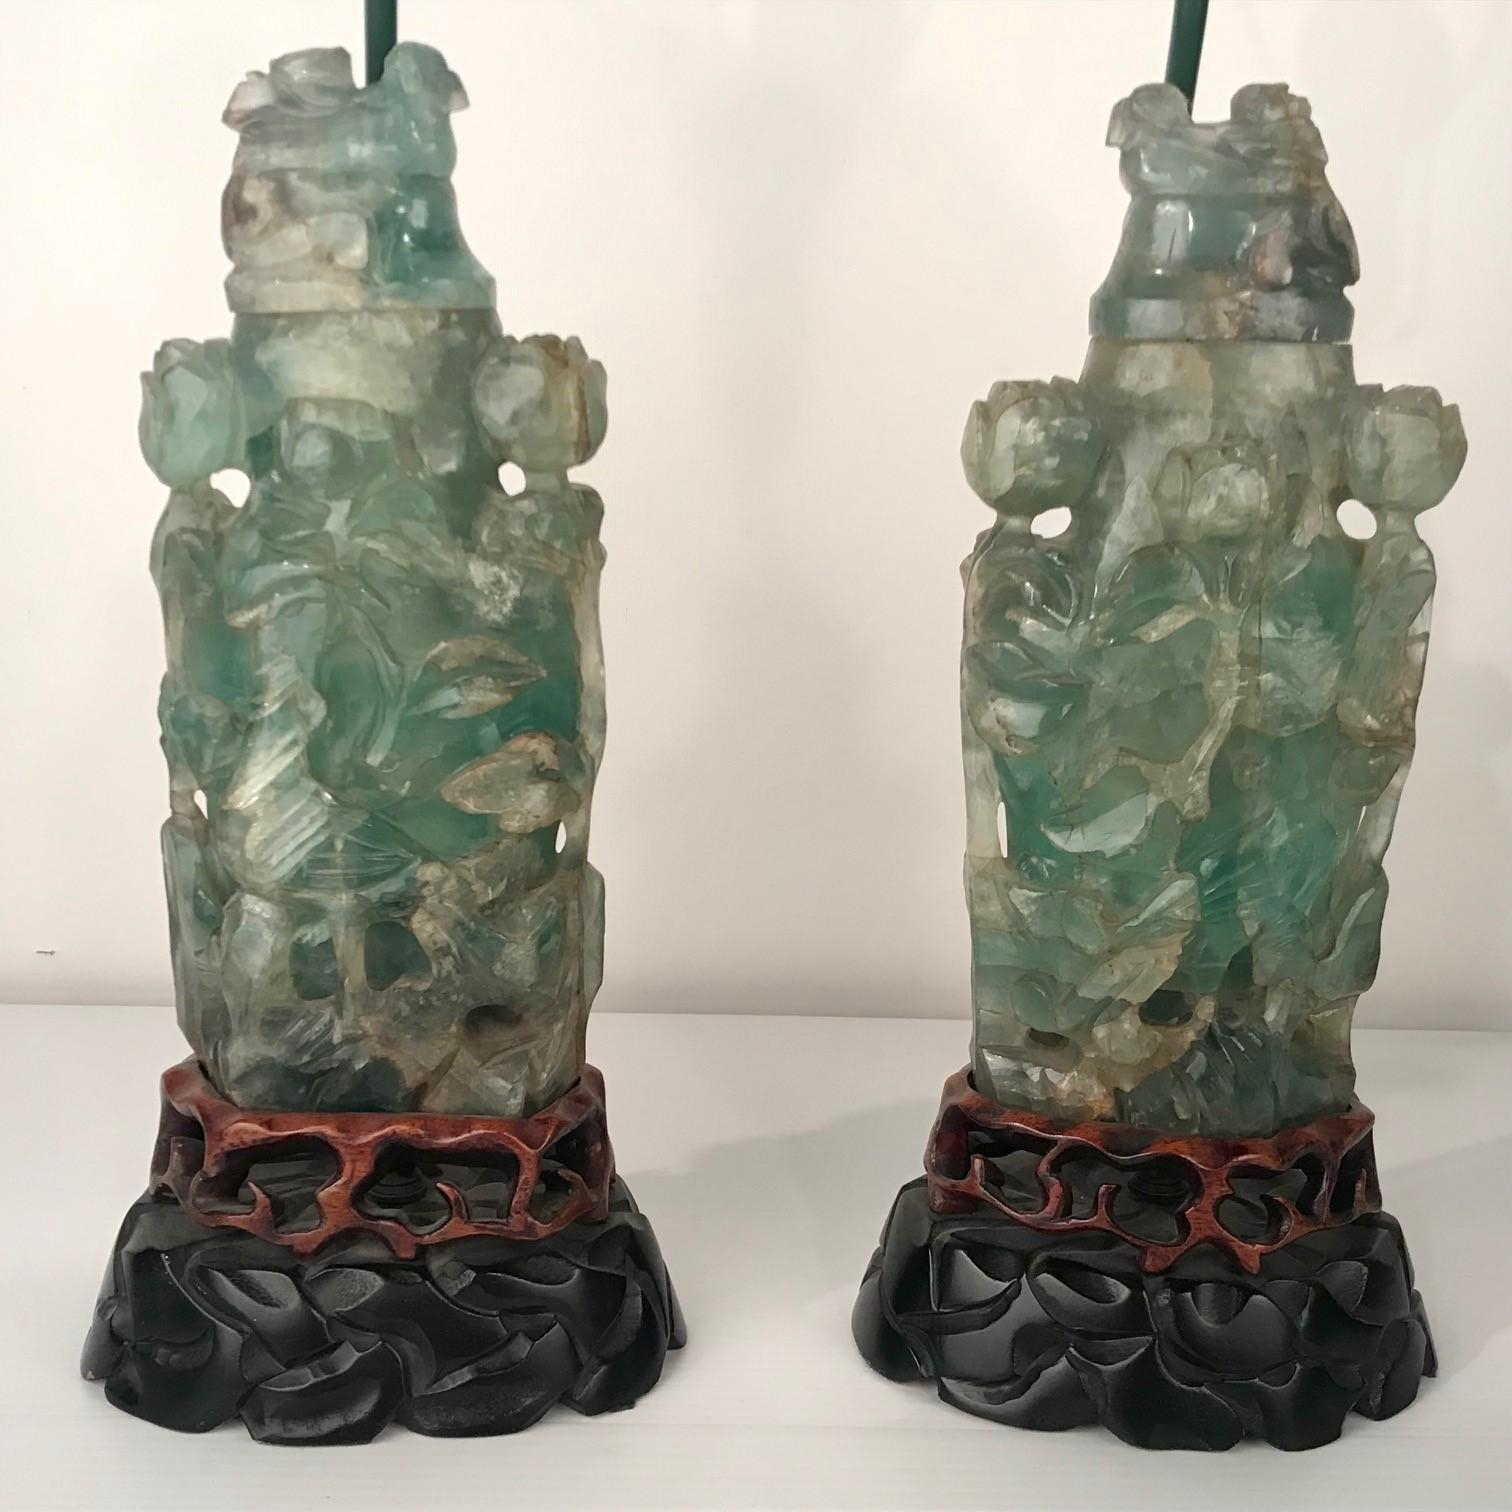 This pair are carved in relief with birds, leaves and flowers, raised on wooden pierced and simulated rocky bases They are mounted as lamps. The shades are reminiscent of oriental pavilions and the antique jade finials are in pierced